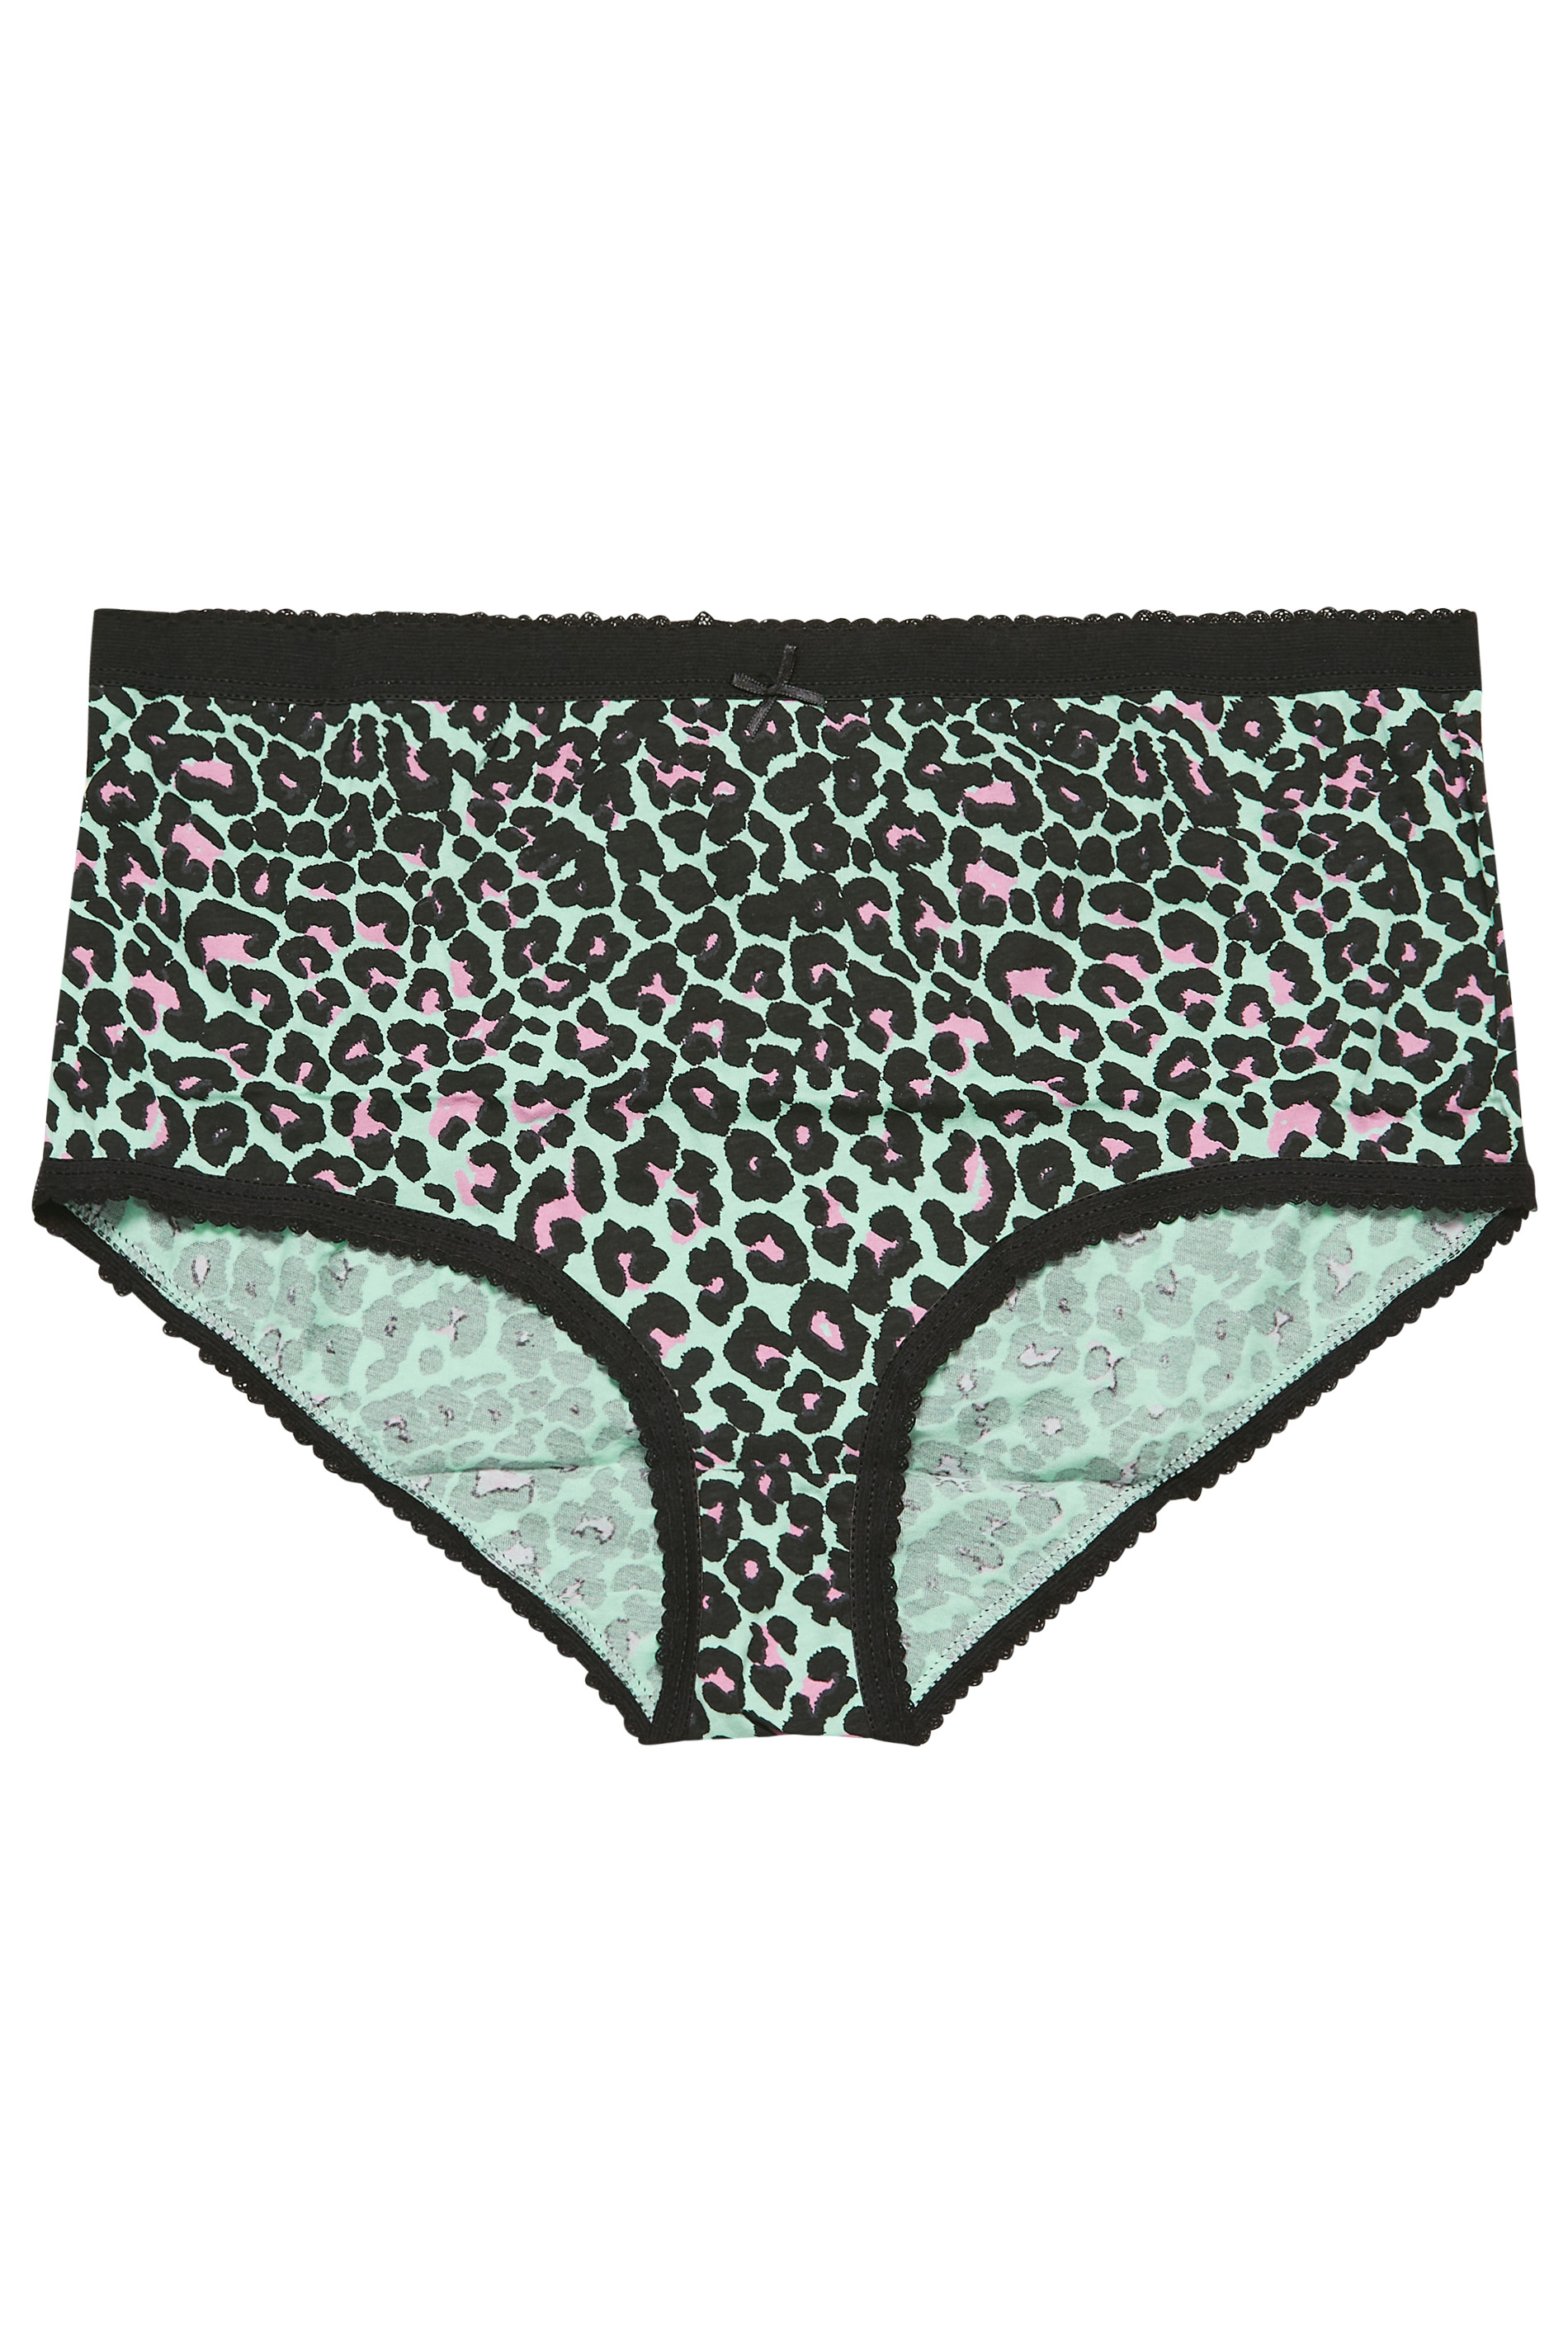 Plus Size 5 PACK Bright Pink Animal Print High Waisted Full Briefs